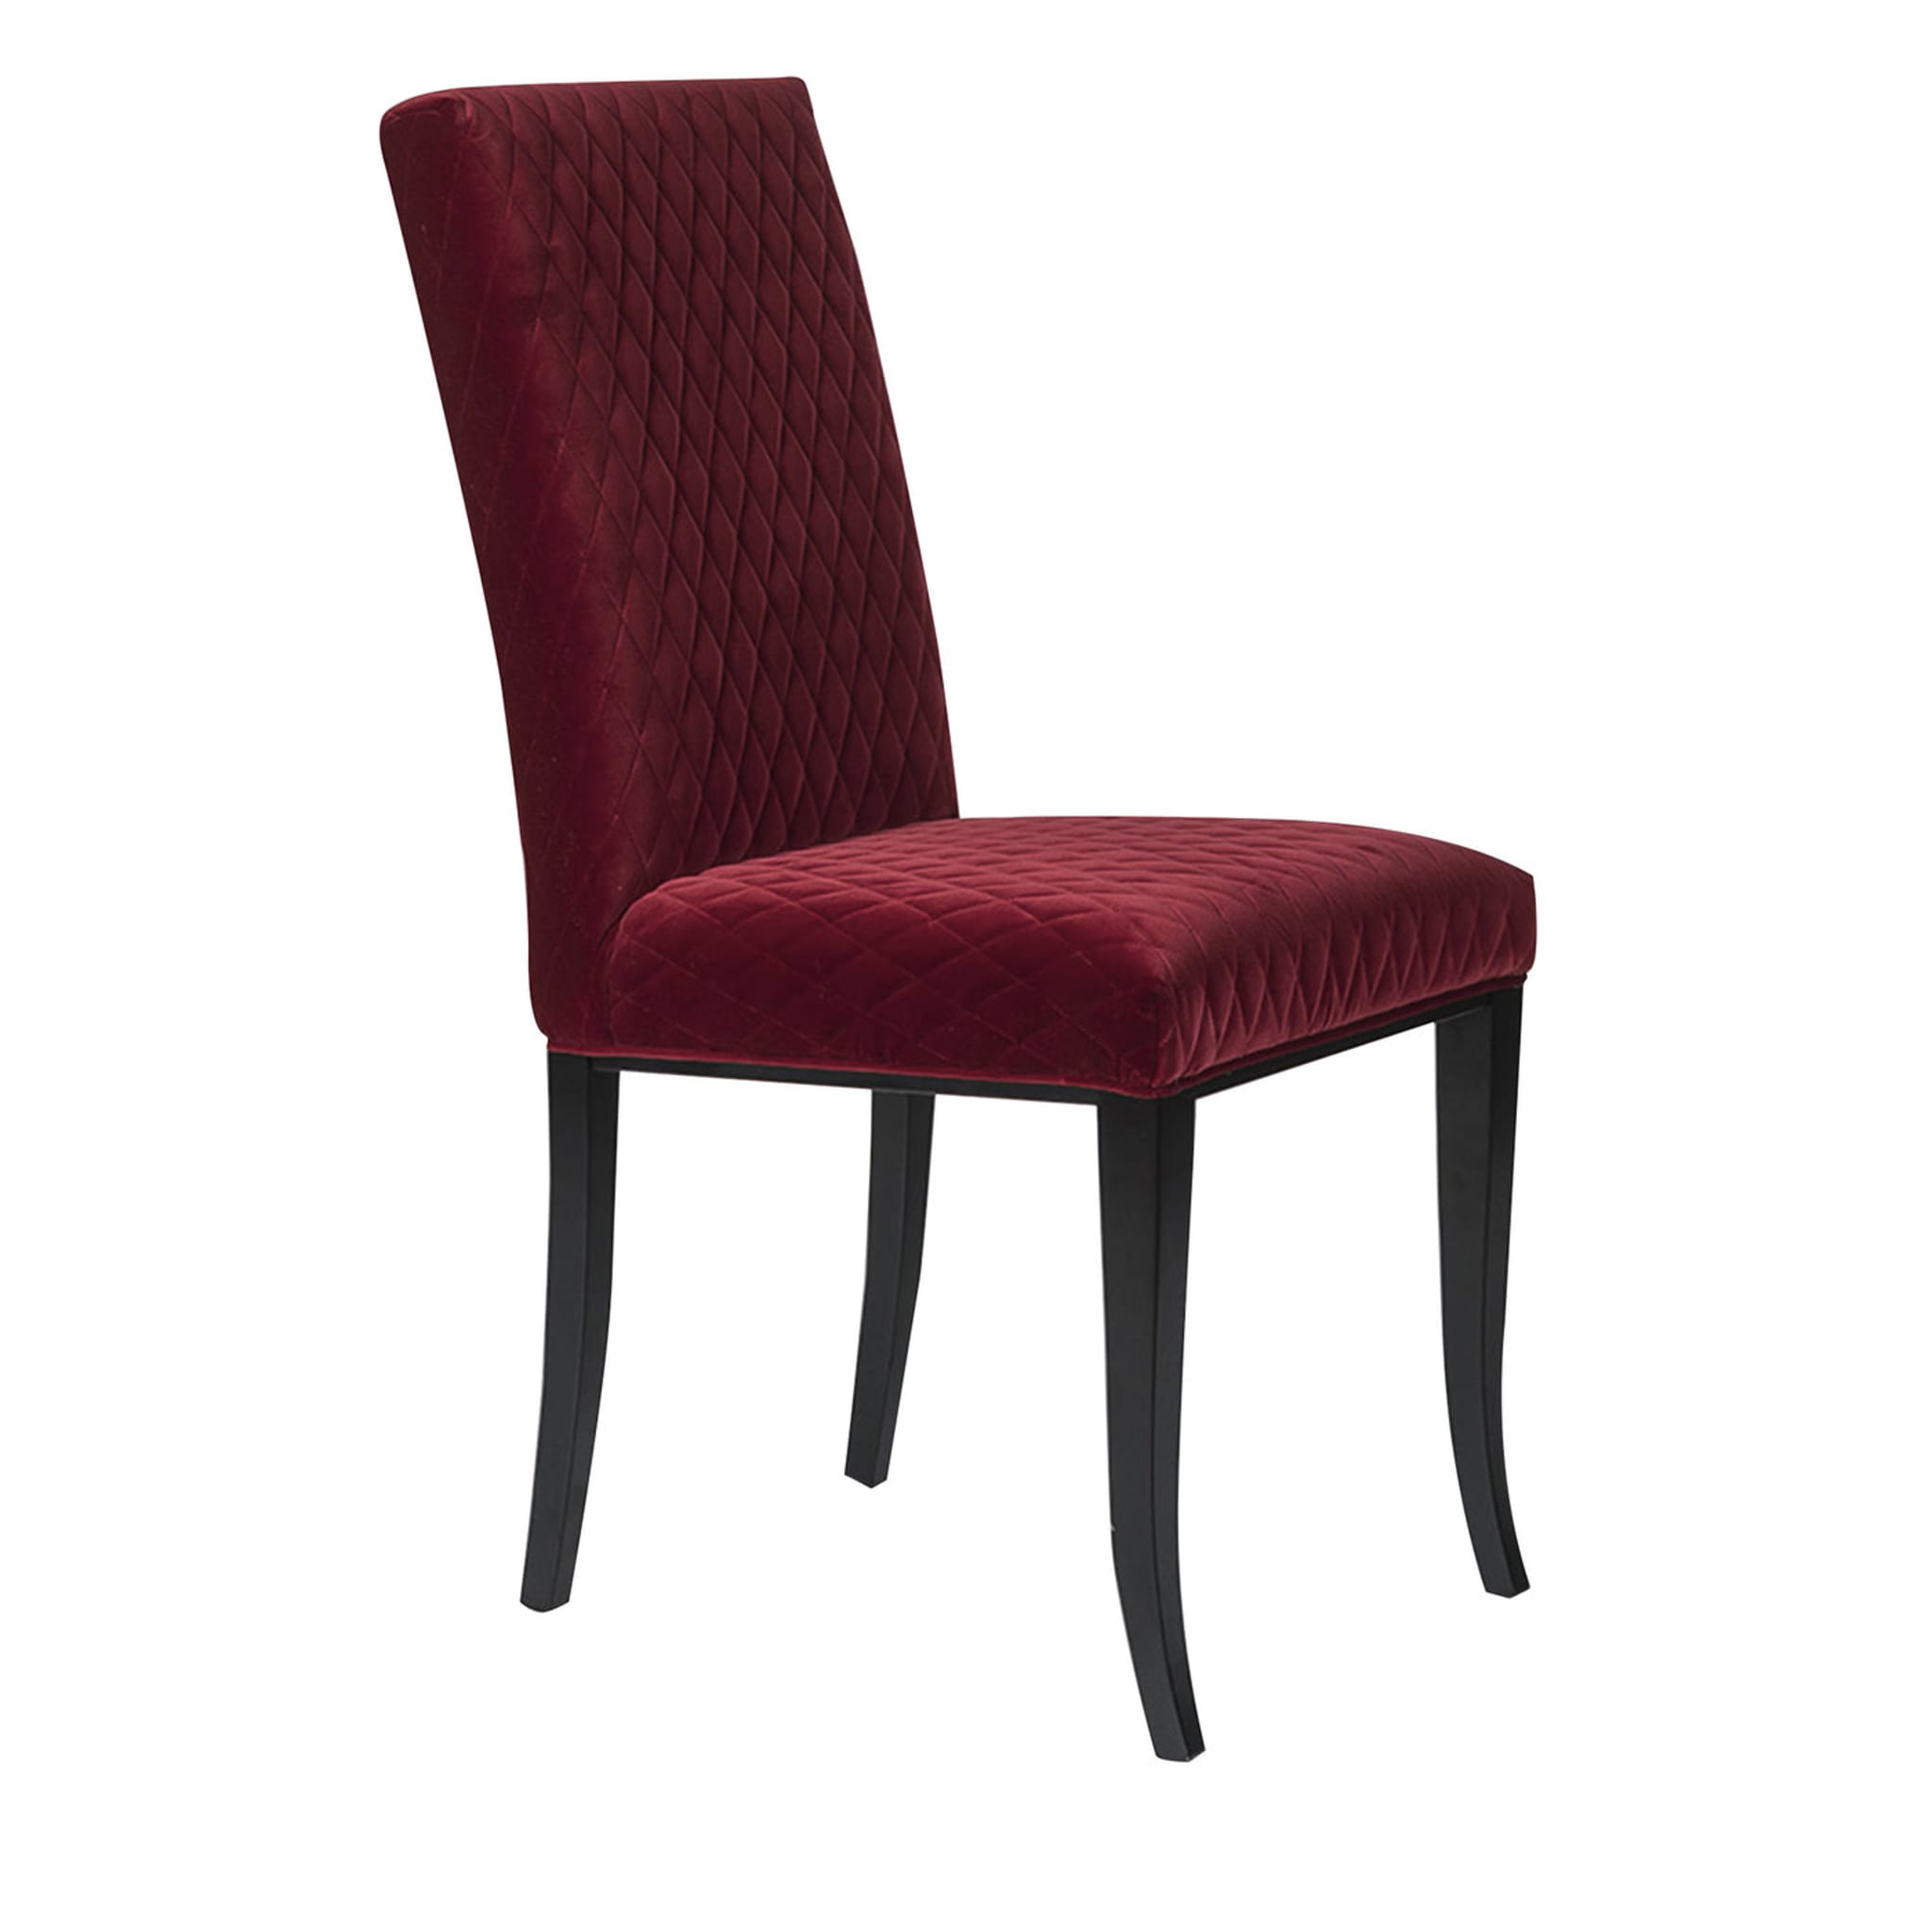 Set of 2 Audrey Chairs - Main view